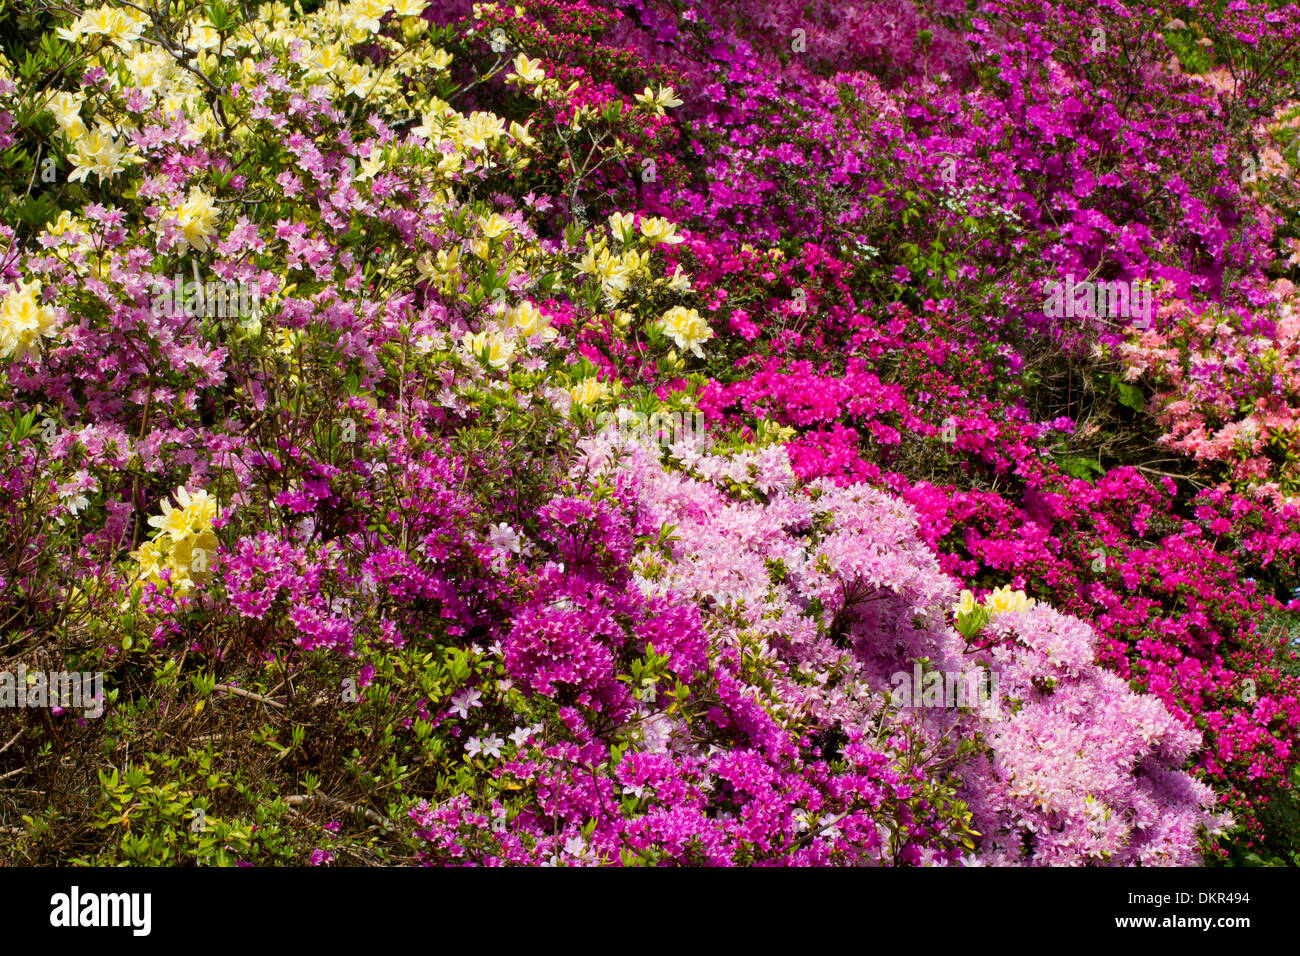 Cultivated hybrids of Azaleas and Rhododendrons flowering in a garden. Herefordshire, England. May. Stock Photo